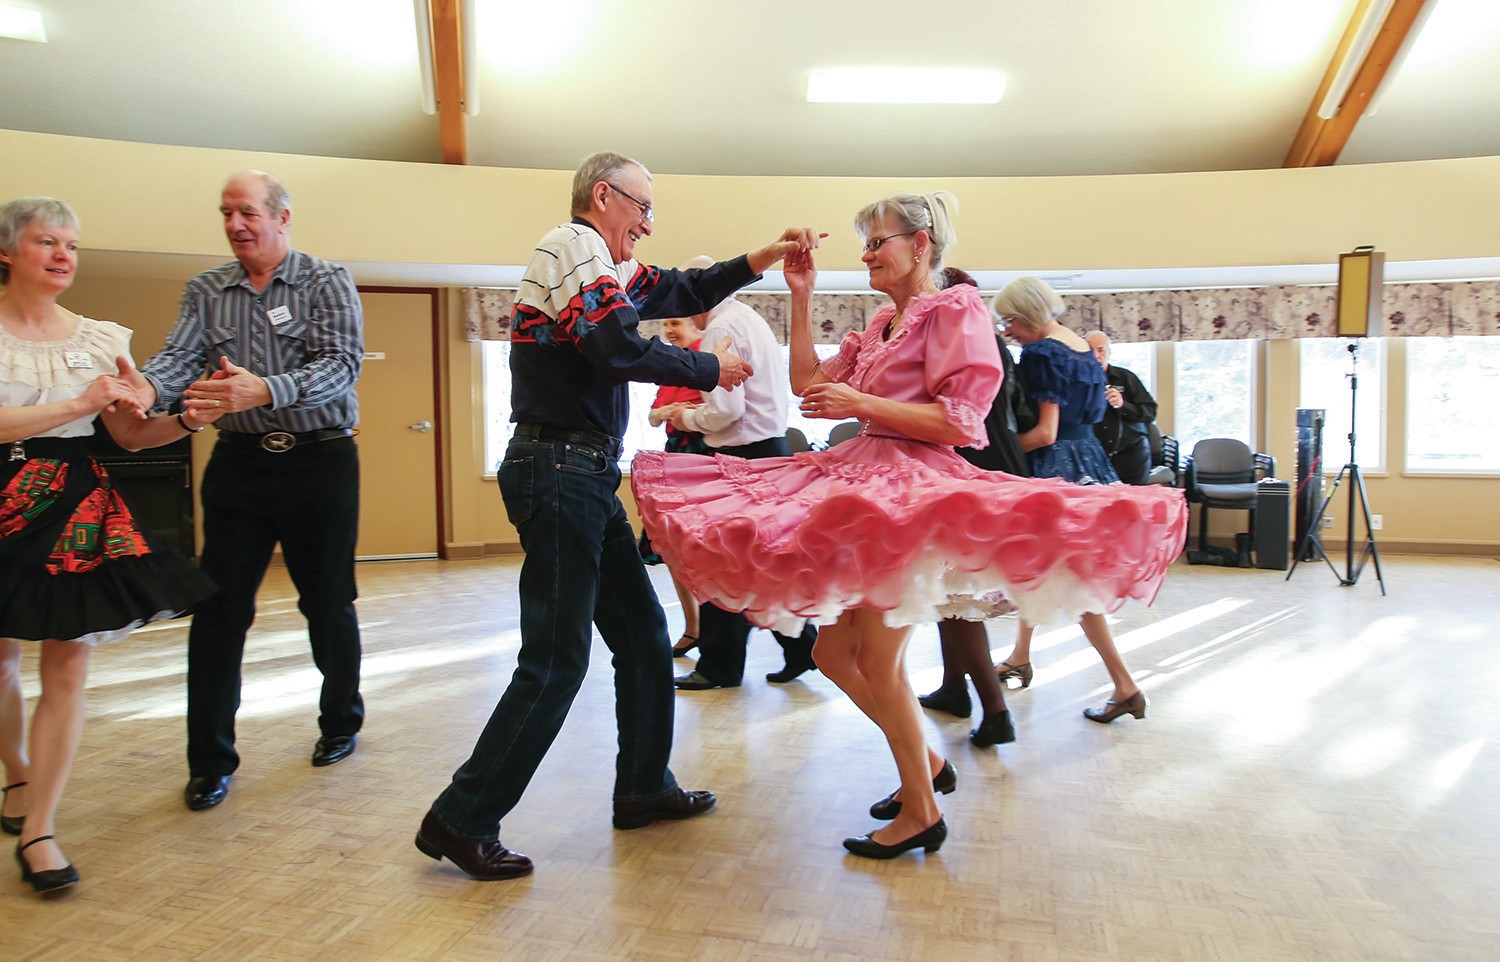 DO-SI-DO- From left, Andre Laliberte spun Ingrid Jansen during a square dance at the Golden Circle Seniors Resource Centre in Red Deer on Friday. Zachary Cormier/Red Deer Express